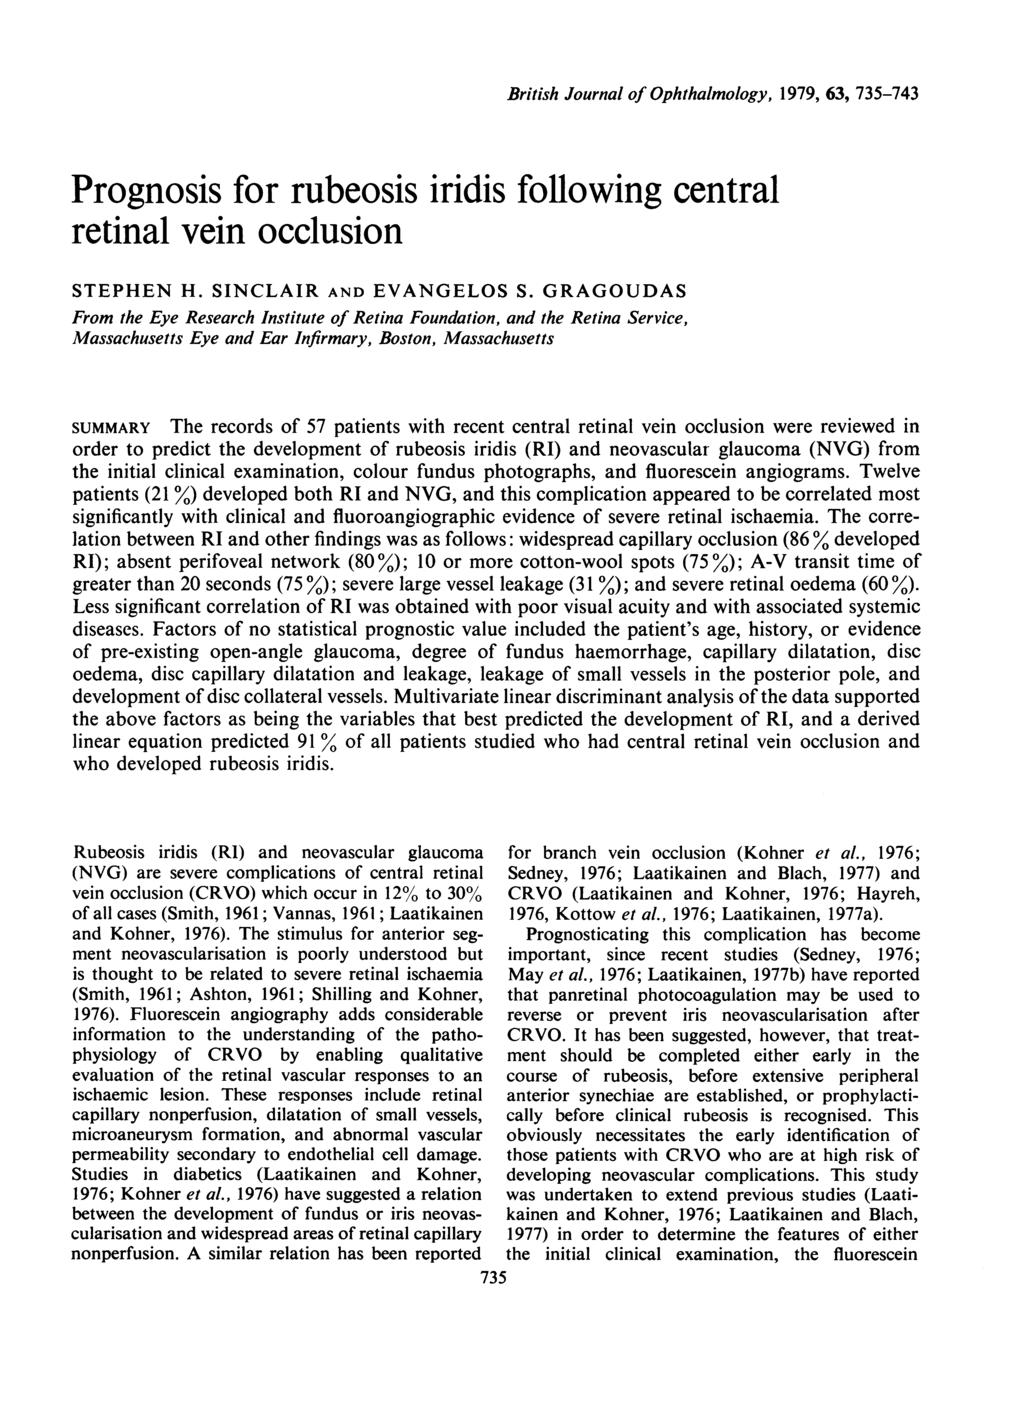 British Journal of Ophthalmology, 1979, 63, 735-743 Prognosis for rubeosis iridis following central retinal vein occlusion STEPHEN H. SINCLAIR AND EVANGELOS S.